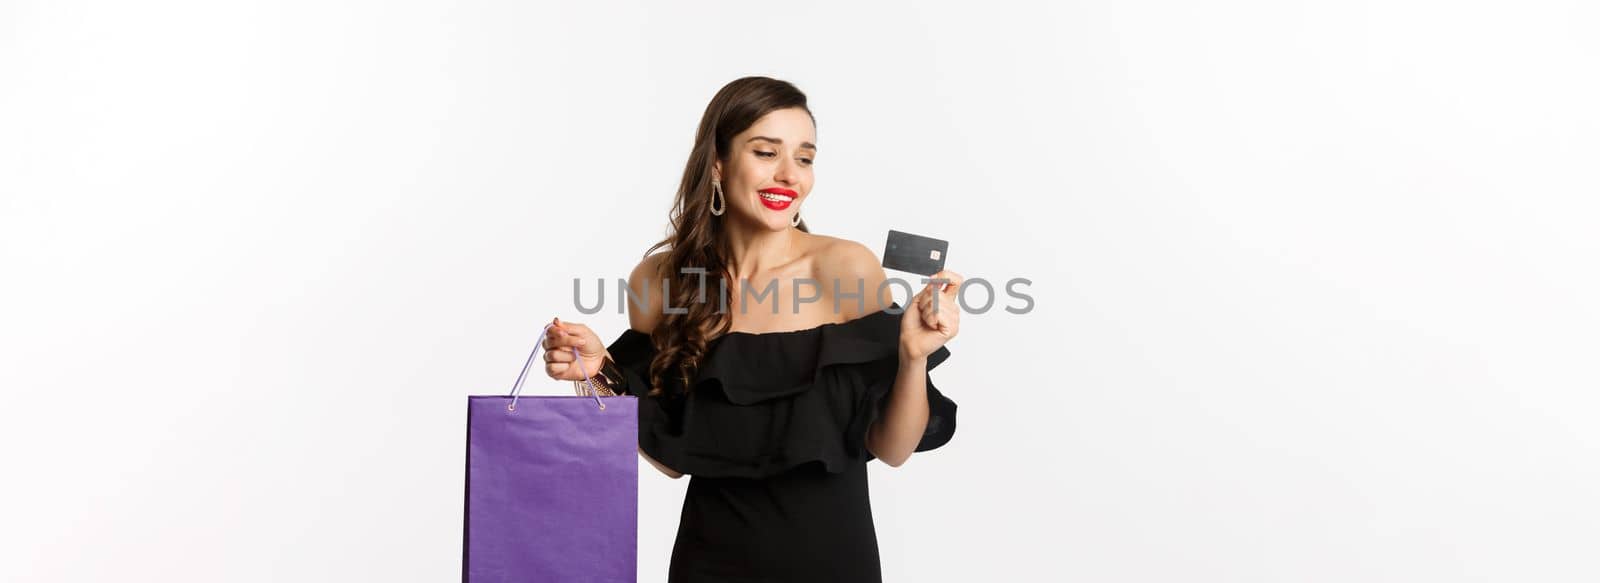 Stylish young woman in black dress going shopping, holding bag and credit card, smiling pleased, standing over white background.